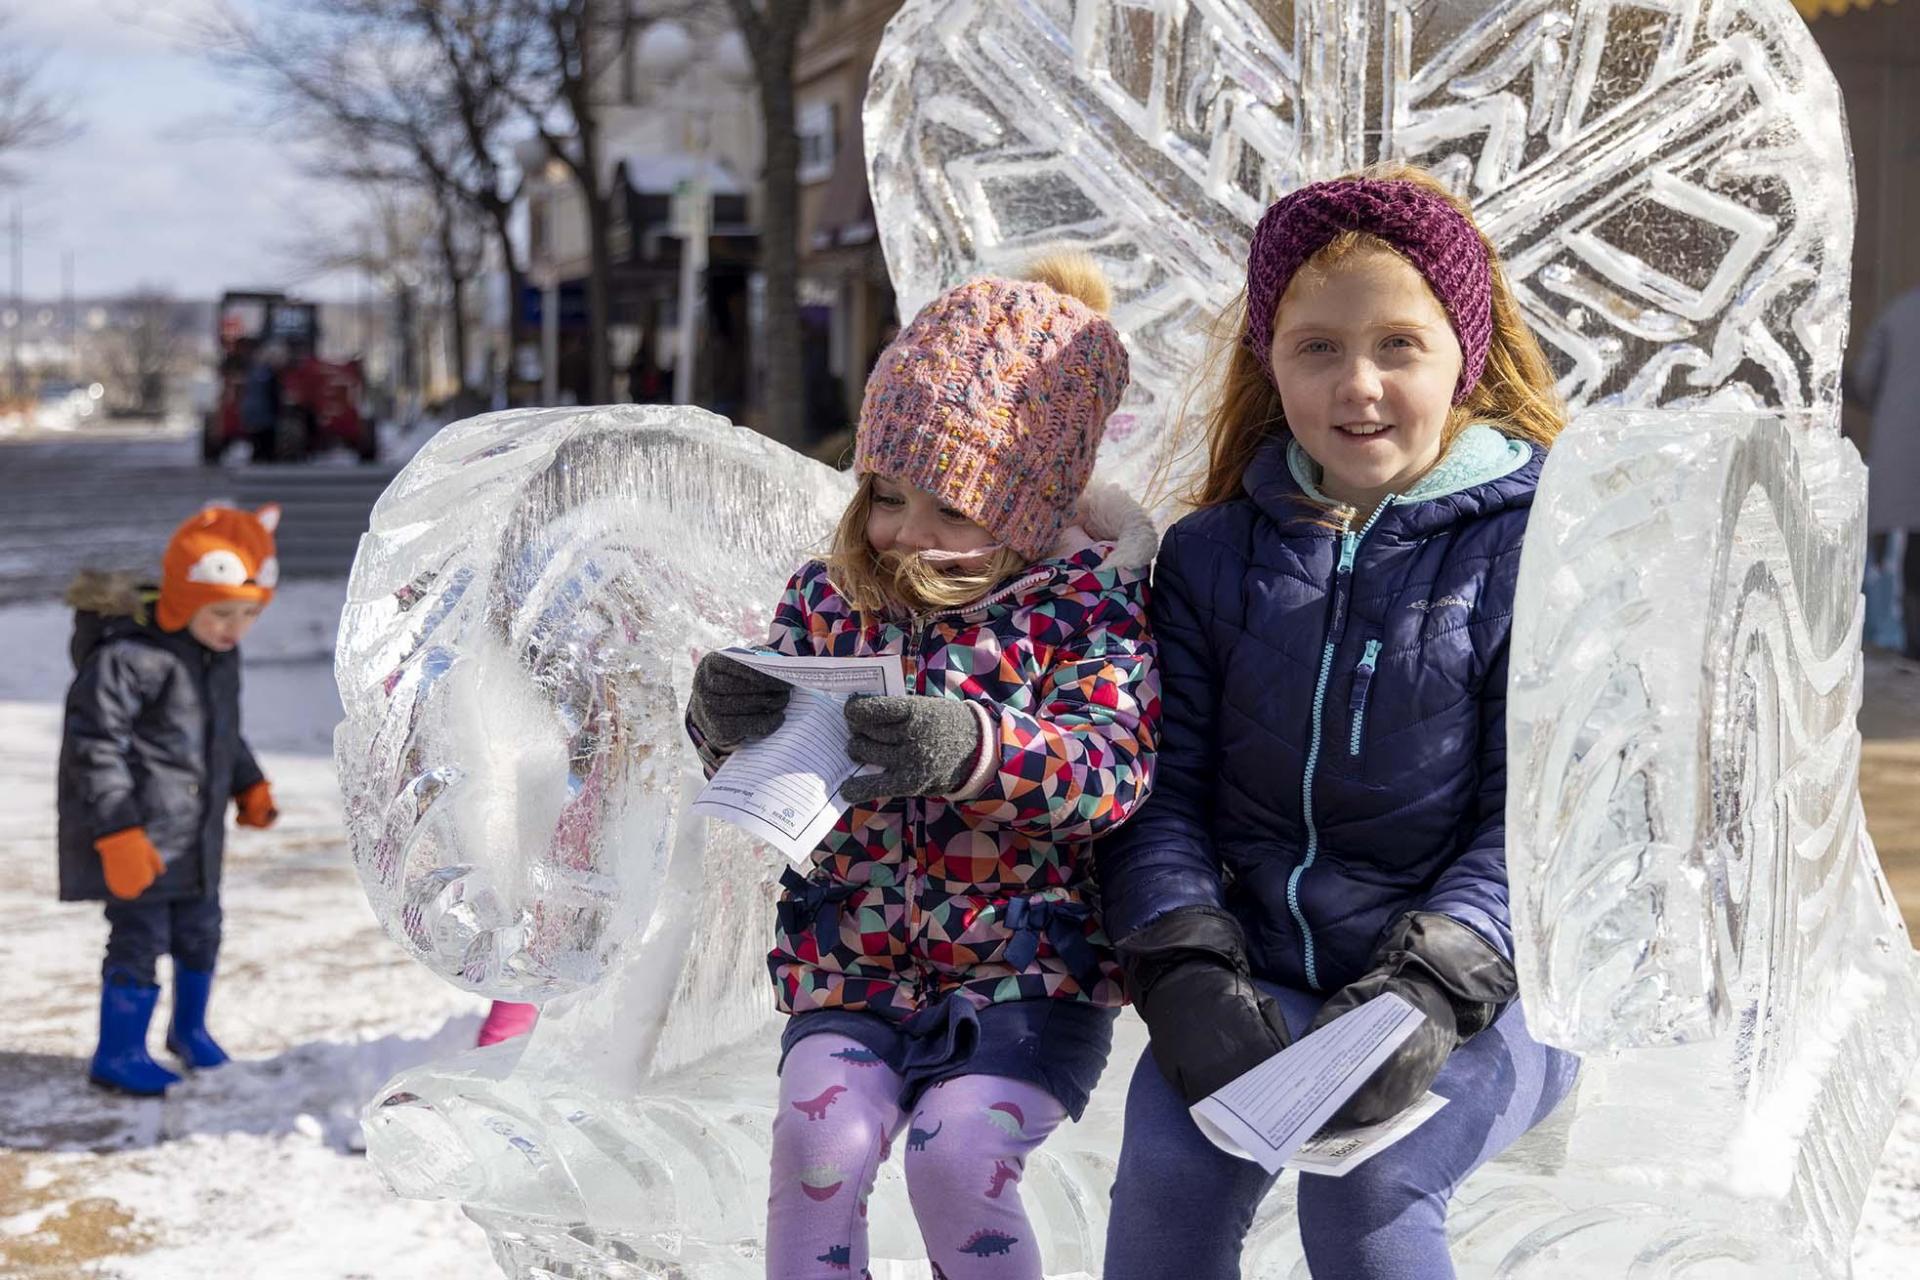 Two kids sitting on an ice chair.